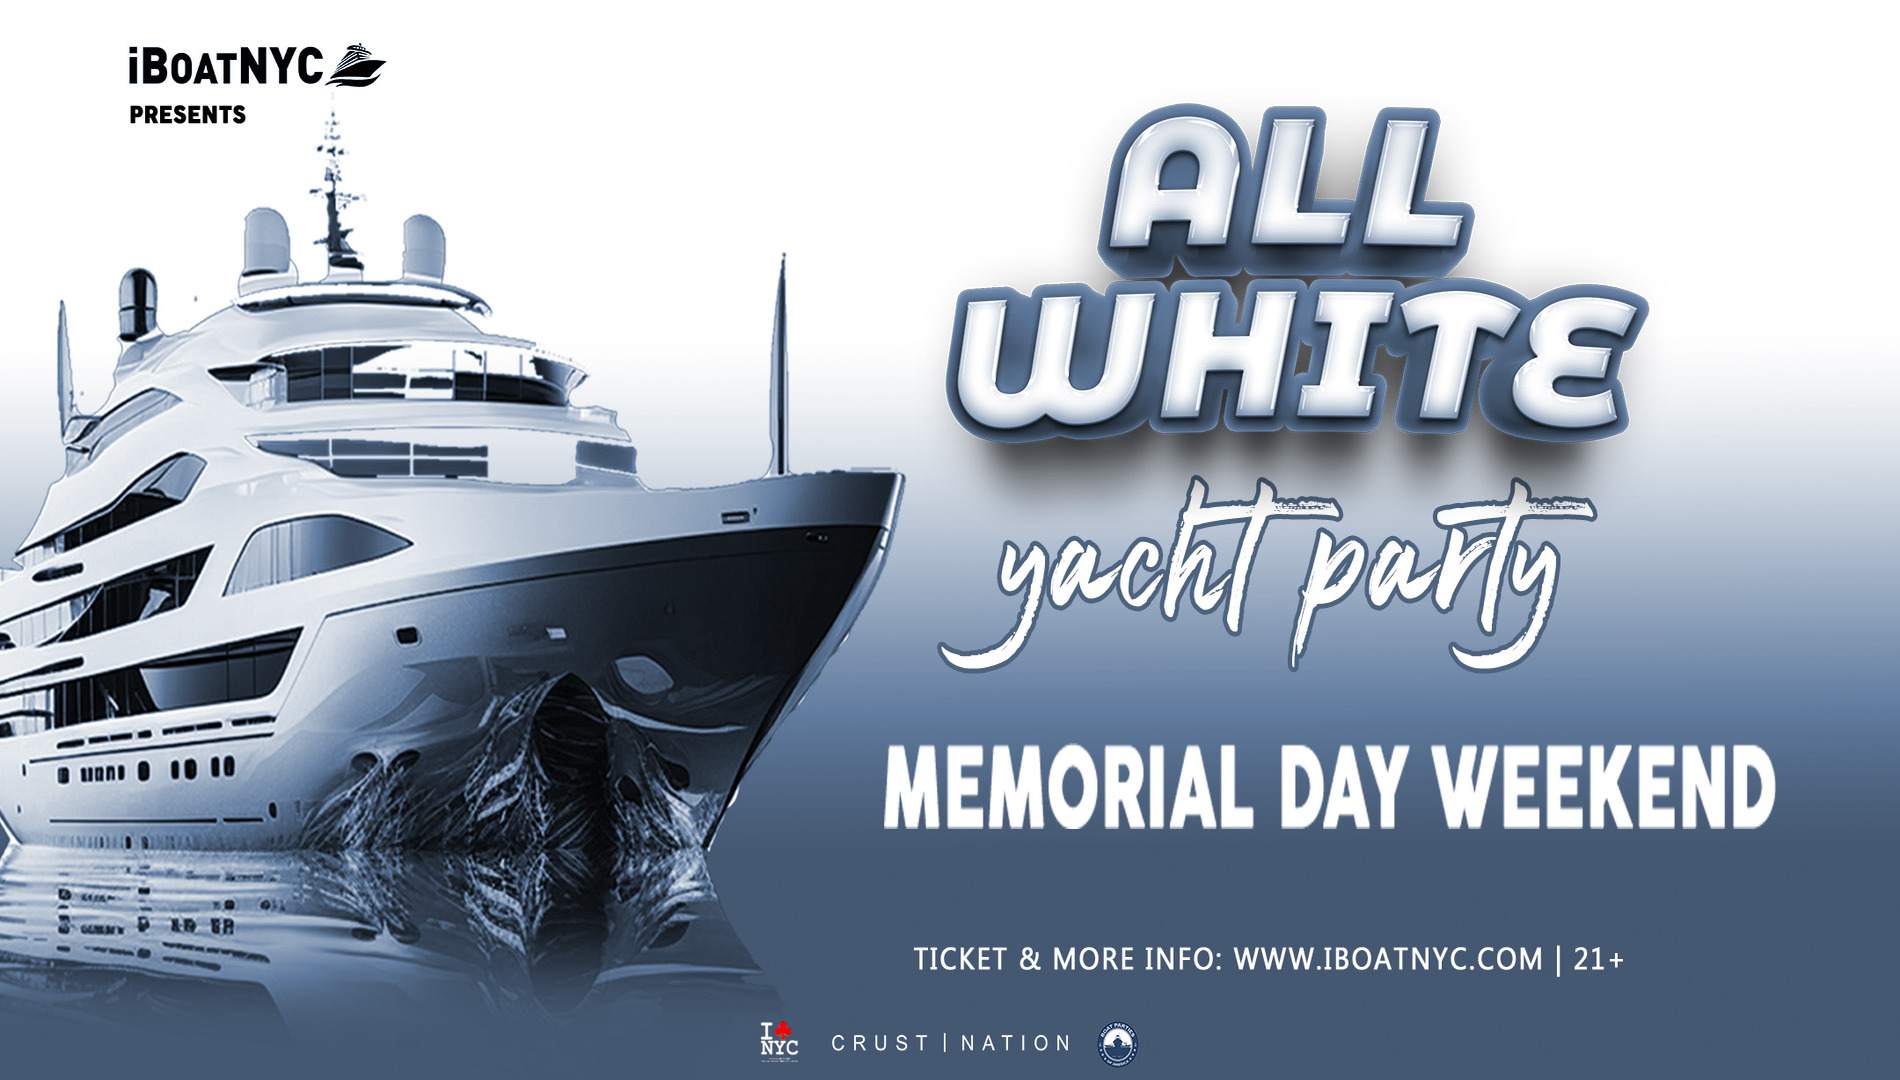 ALL WHITE OUT Boat Party Yacht Cruise NYC - Memorial Day Weekend - Página frontal